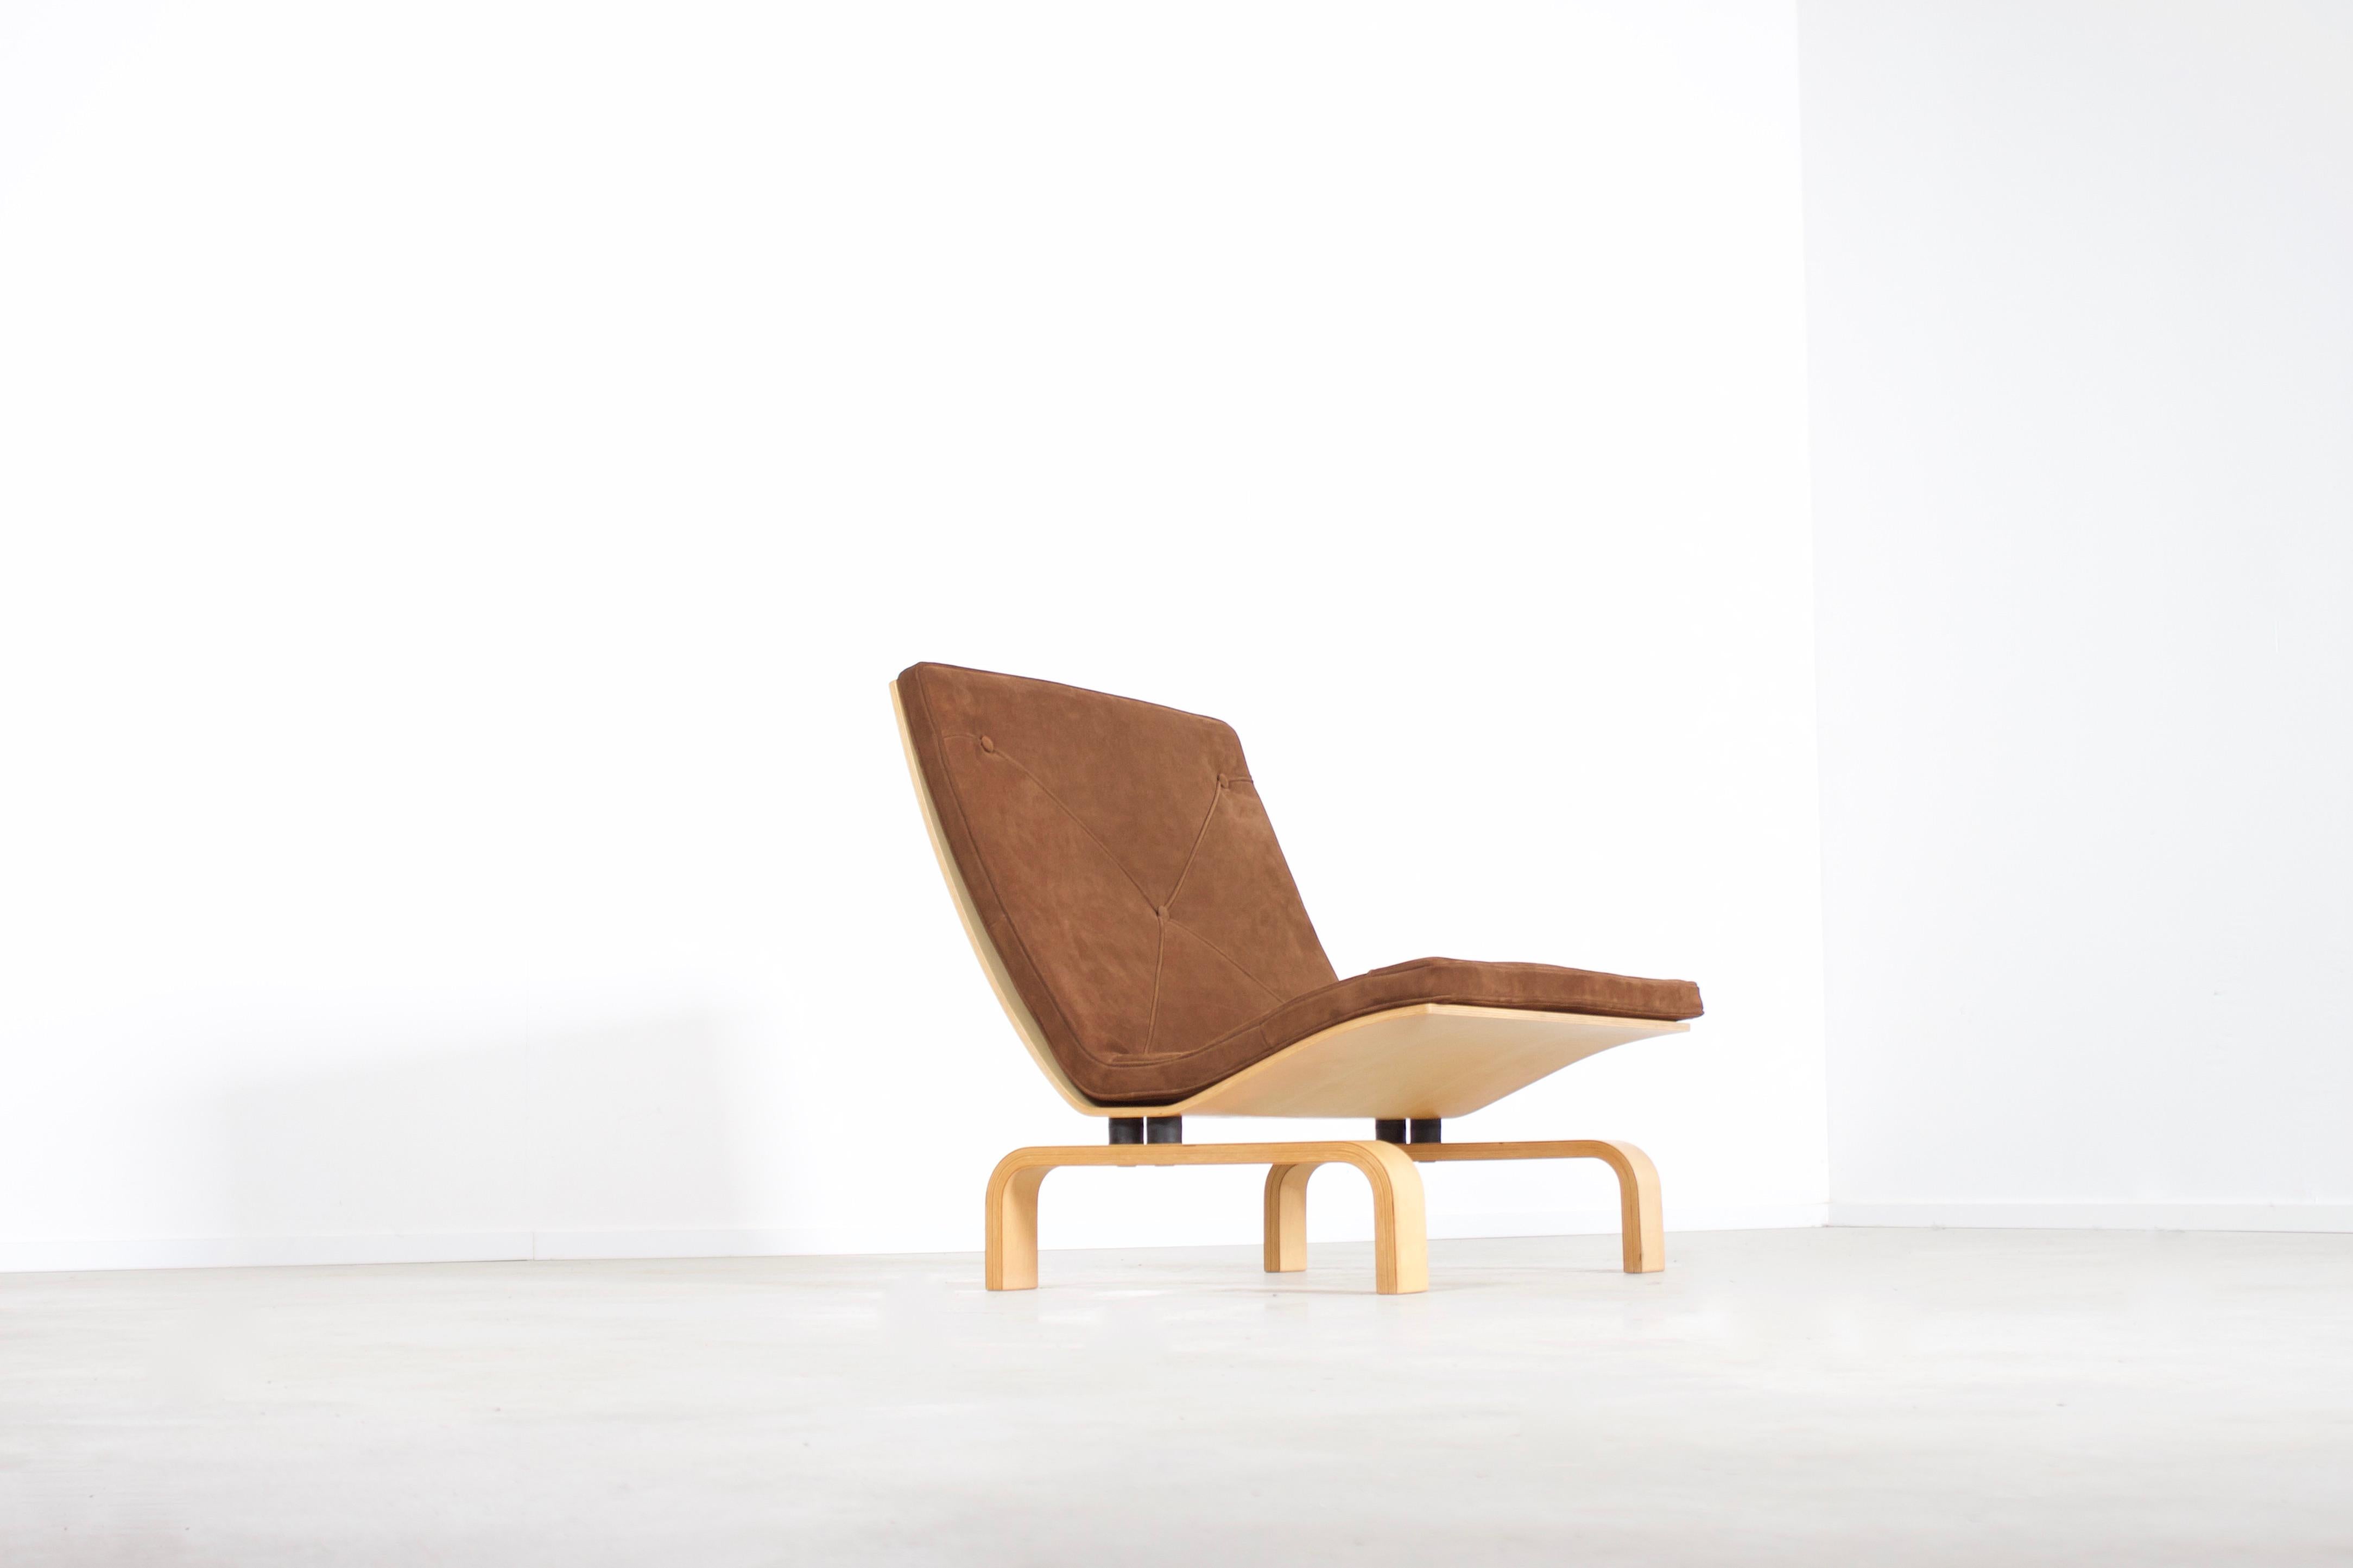 Impressive PK27 easy chair in excellent condition.

Designed by Poul Kjaerholm, Denmark

Manufactured by E. Kold Christensen

These chairs were only produced for three years, between 1971 and 1974

It is constructed of a bent plywood shell, covered